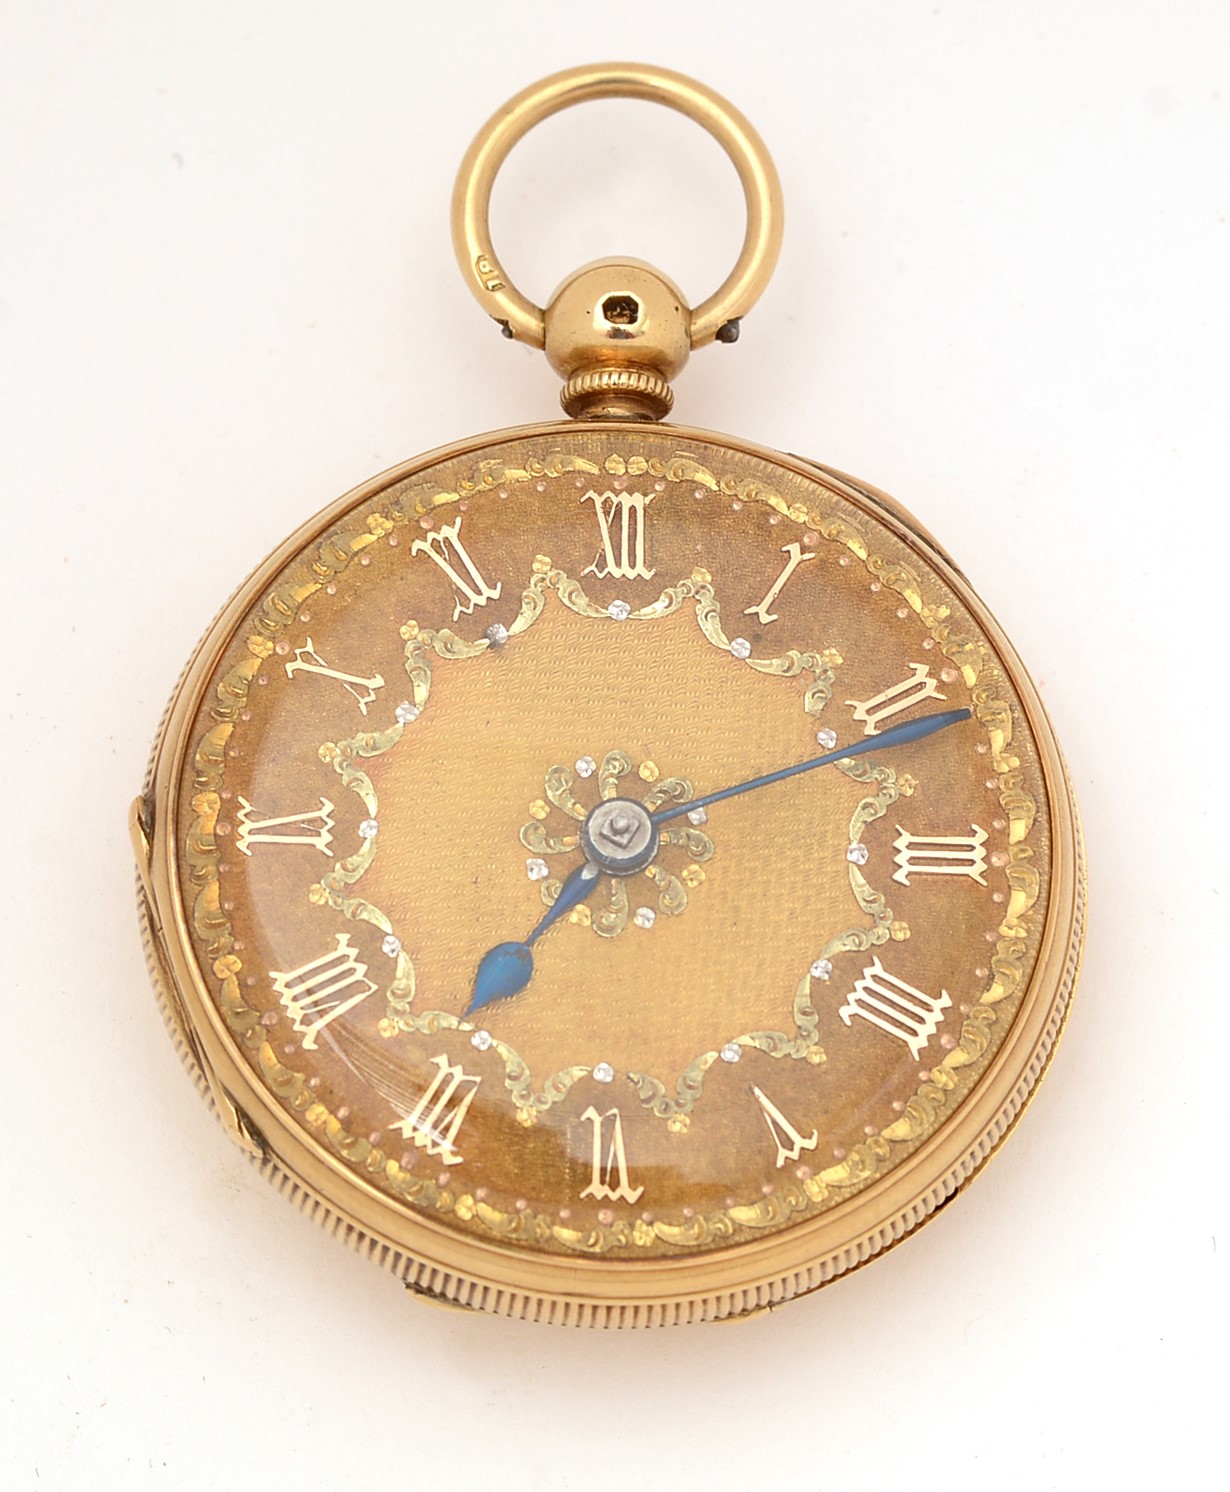 Lot 12 - An 18ct yellow gold cased open faced pocket